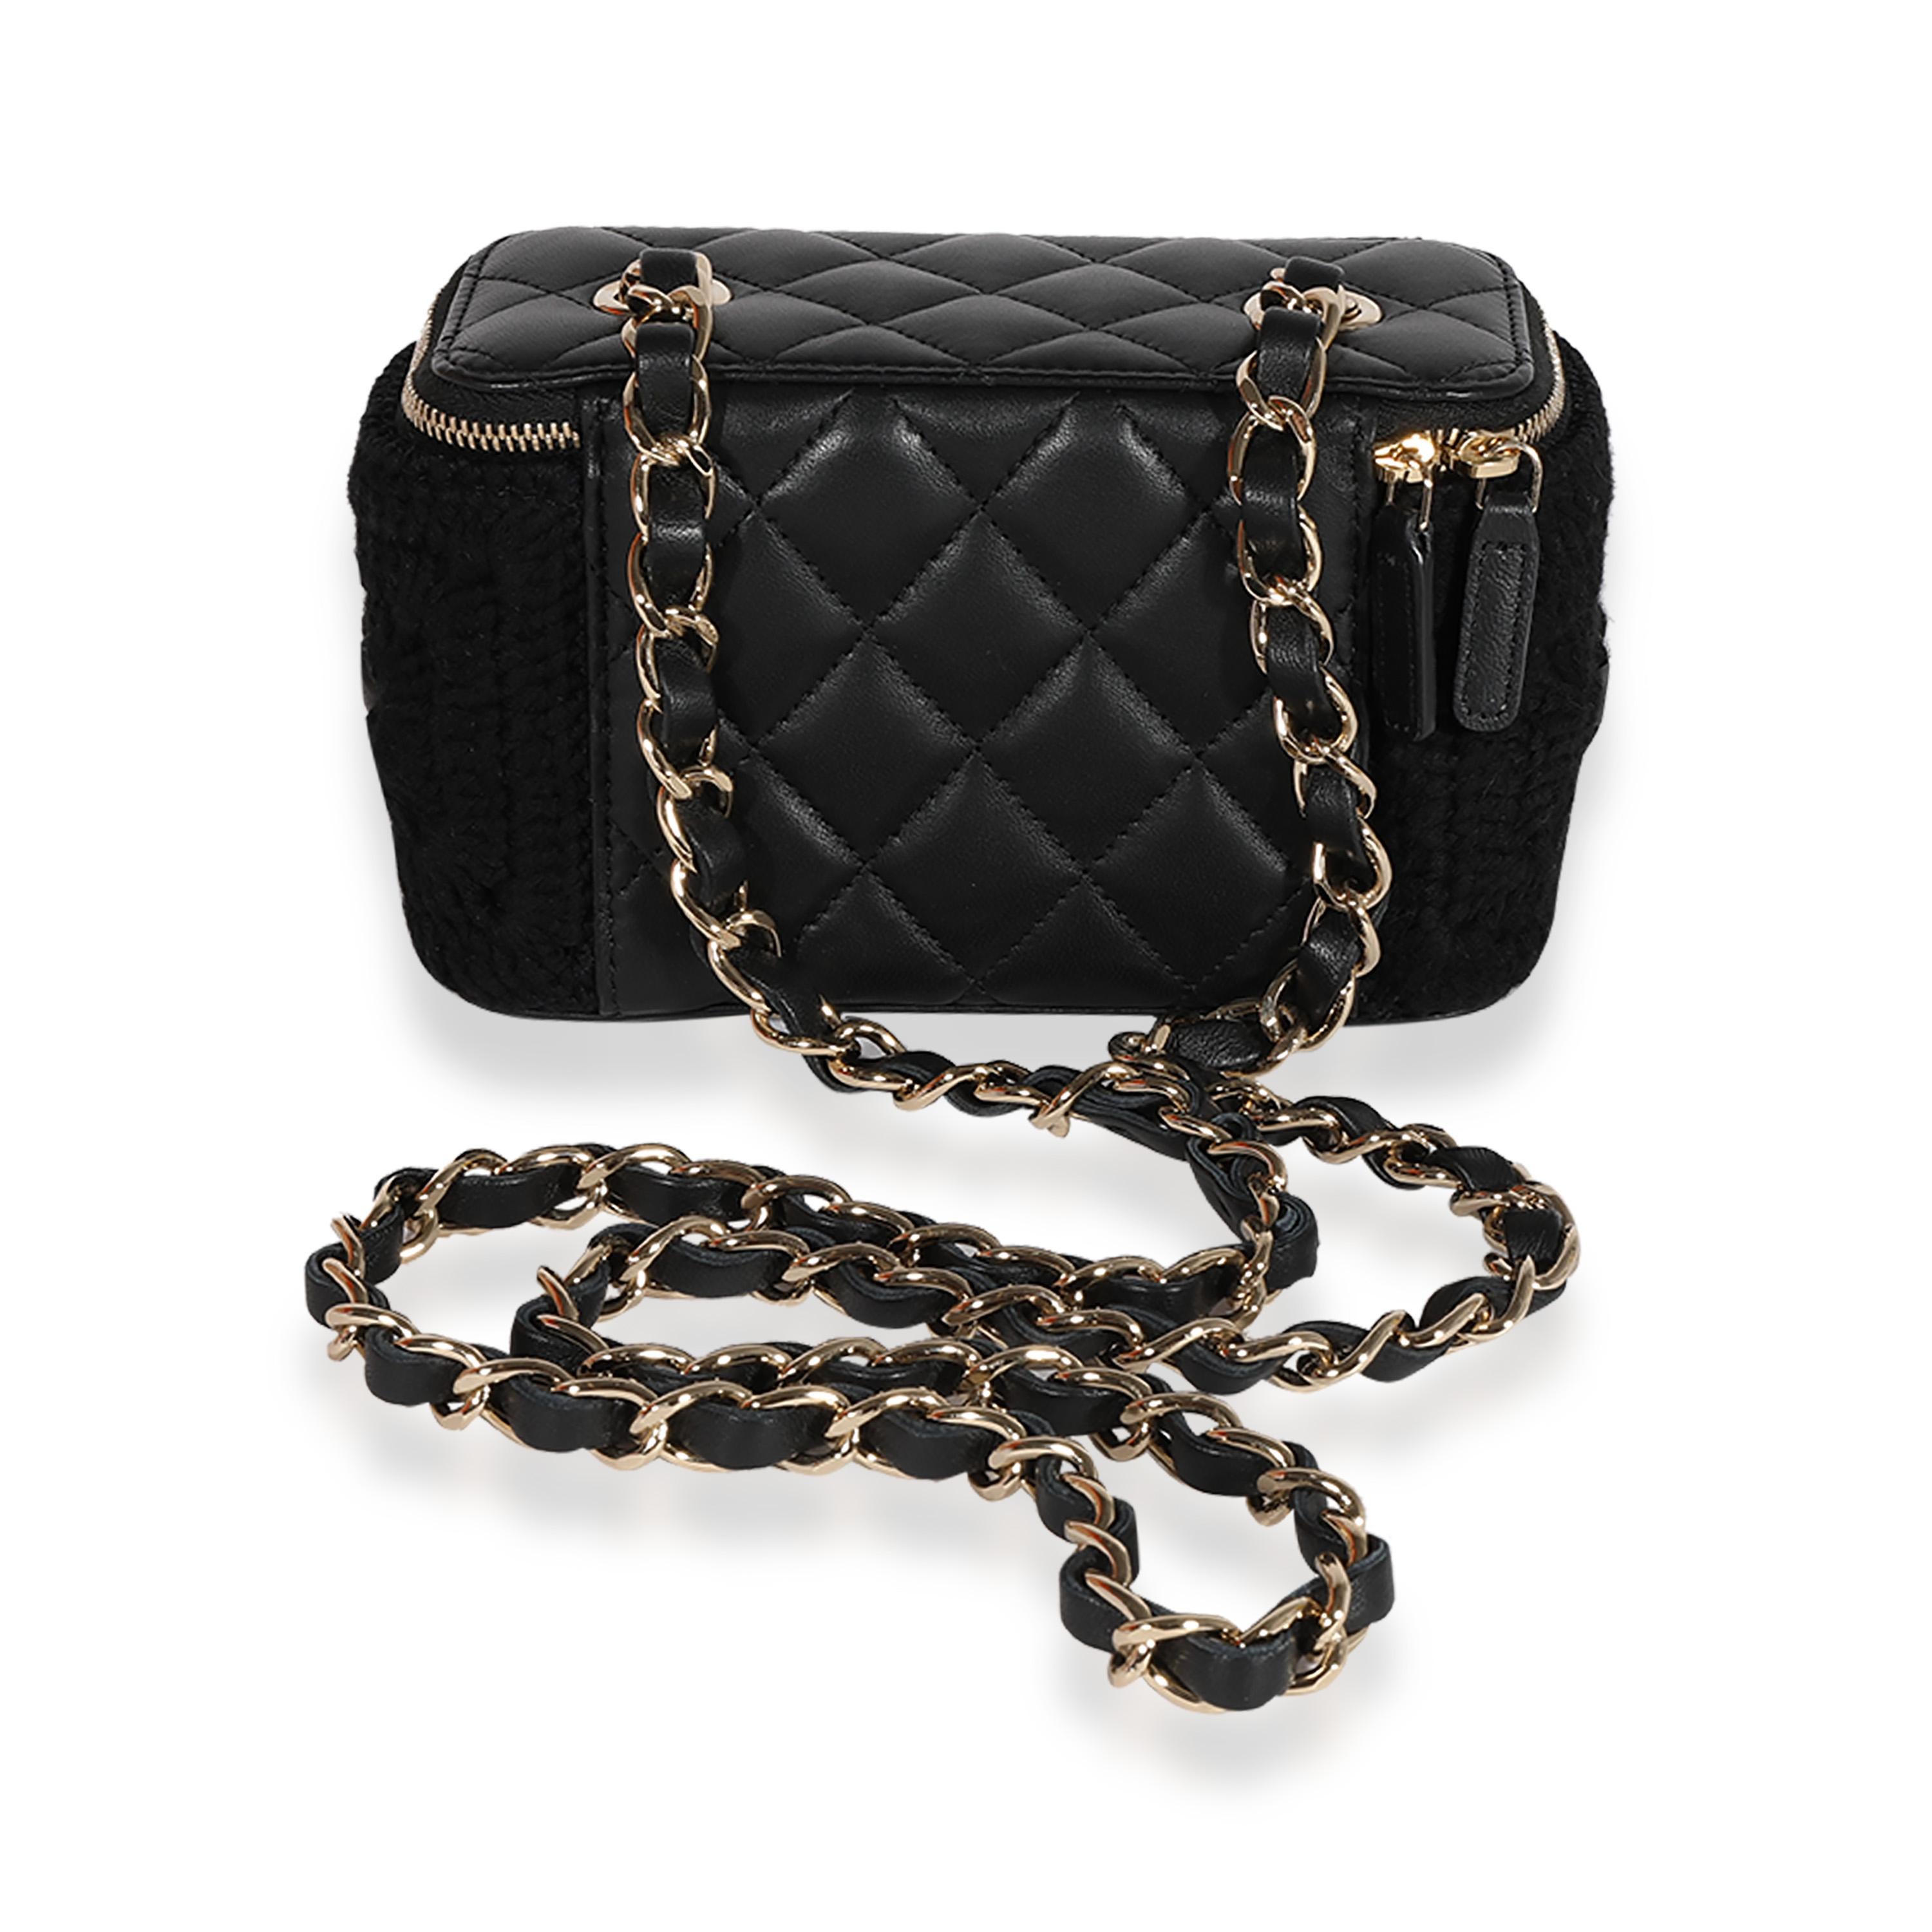 Listing Title: Chanel Black Quilted Lambskin & Crochet Vanity Case with Chain
SKU: 123090
MSRP: 2750.00
Condition: Pre-owned 
Handbag Condition: Very Good
Condition Comments: Very Good Condition. Light scuffing and marks at exterior. Faint